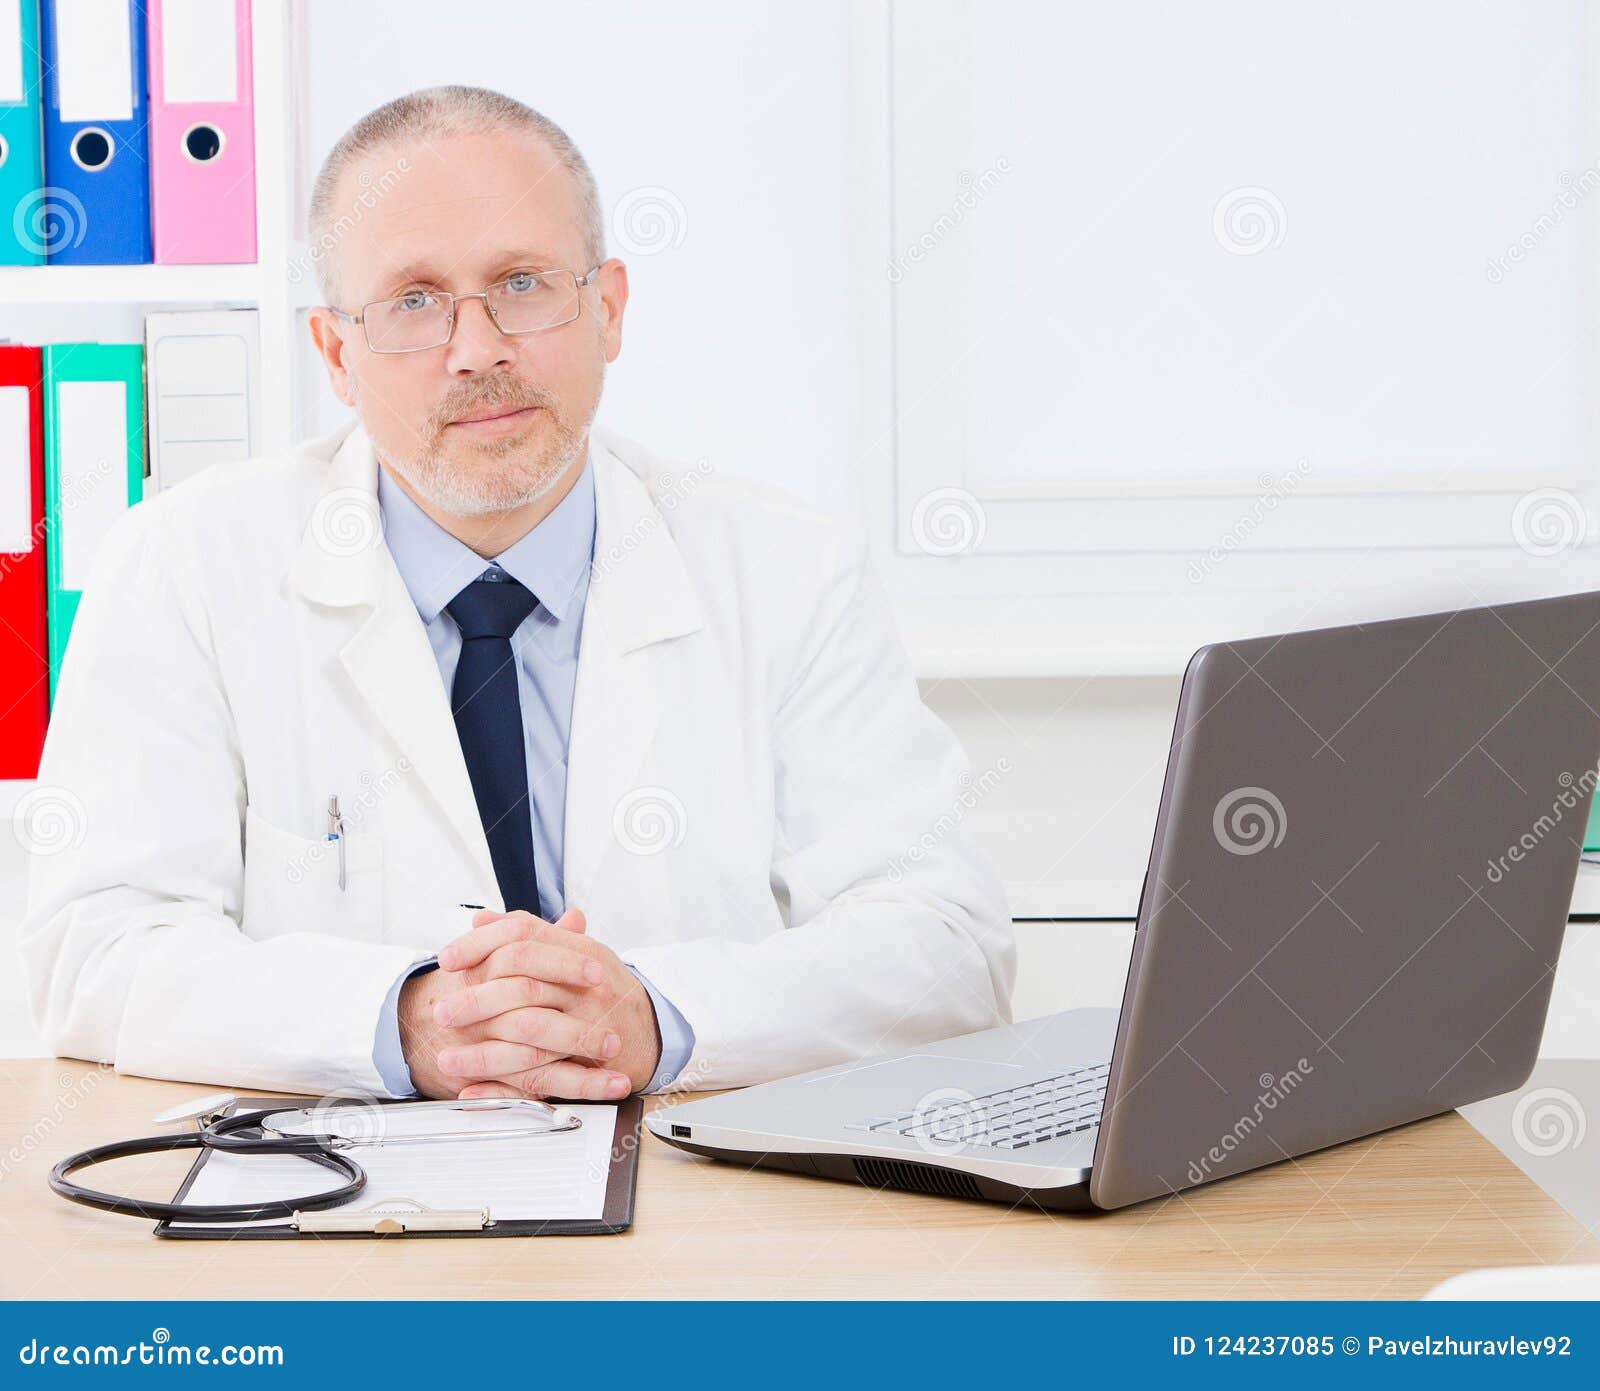 Portrait of Mature, Doctor Sitting in Medical Office Stock Image ...